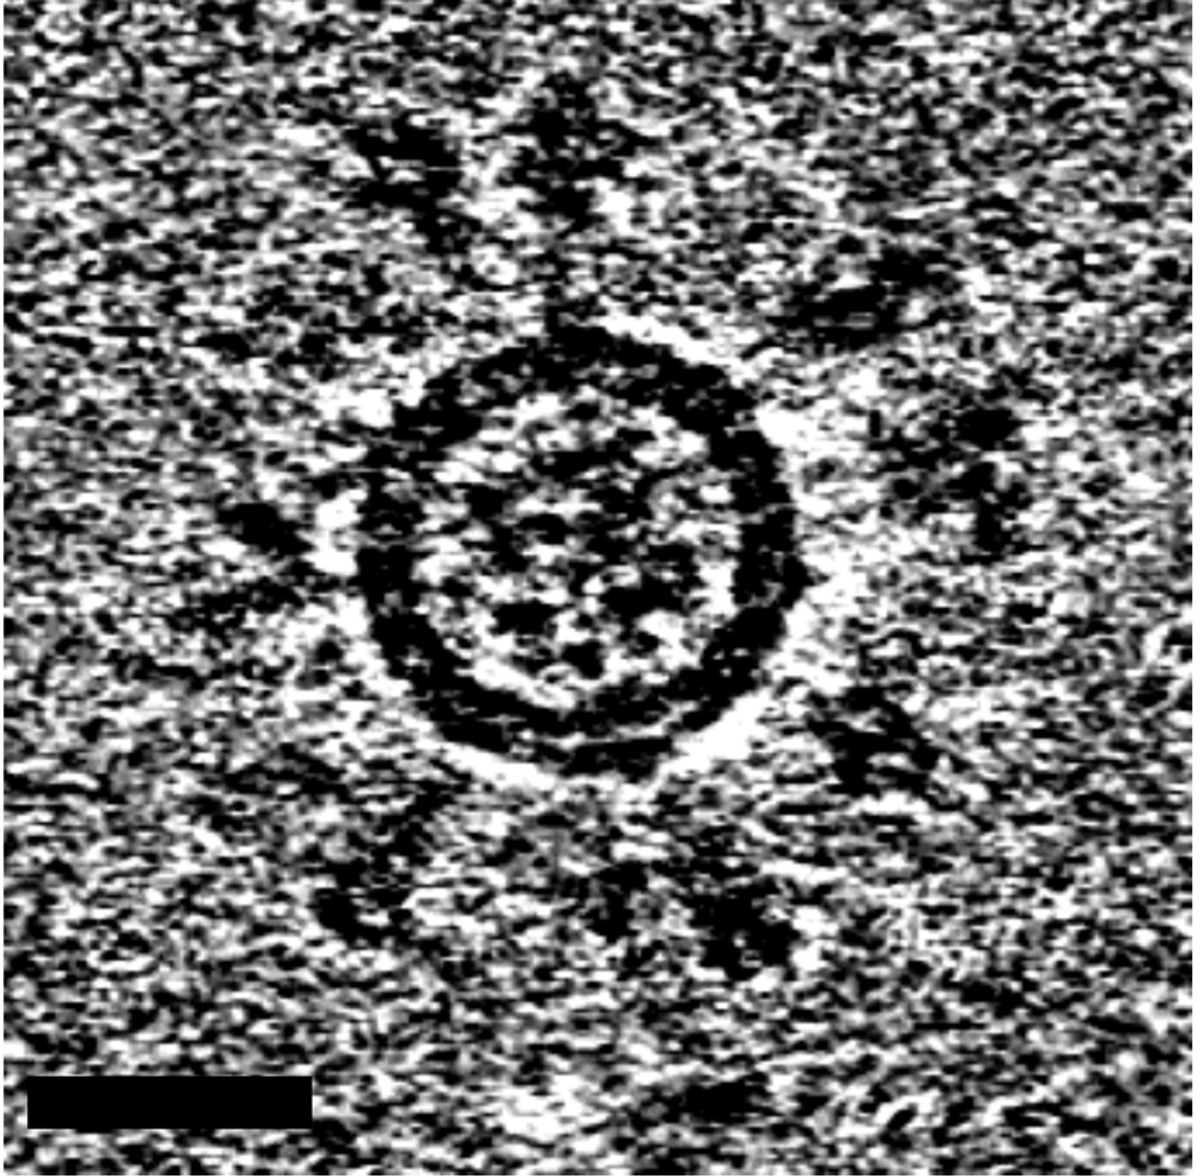 SARS-CoV-2 self-assembling virus-like nanoparticle with spike proteins protruding from the surface.